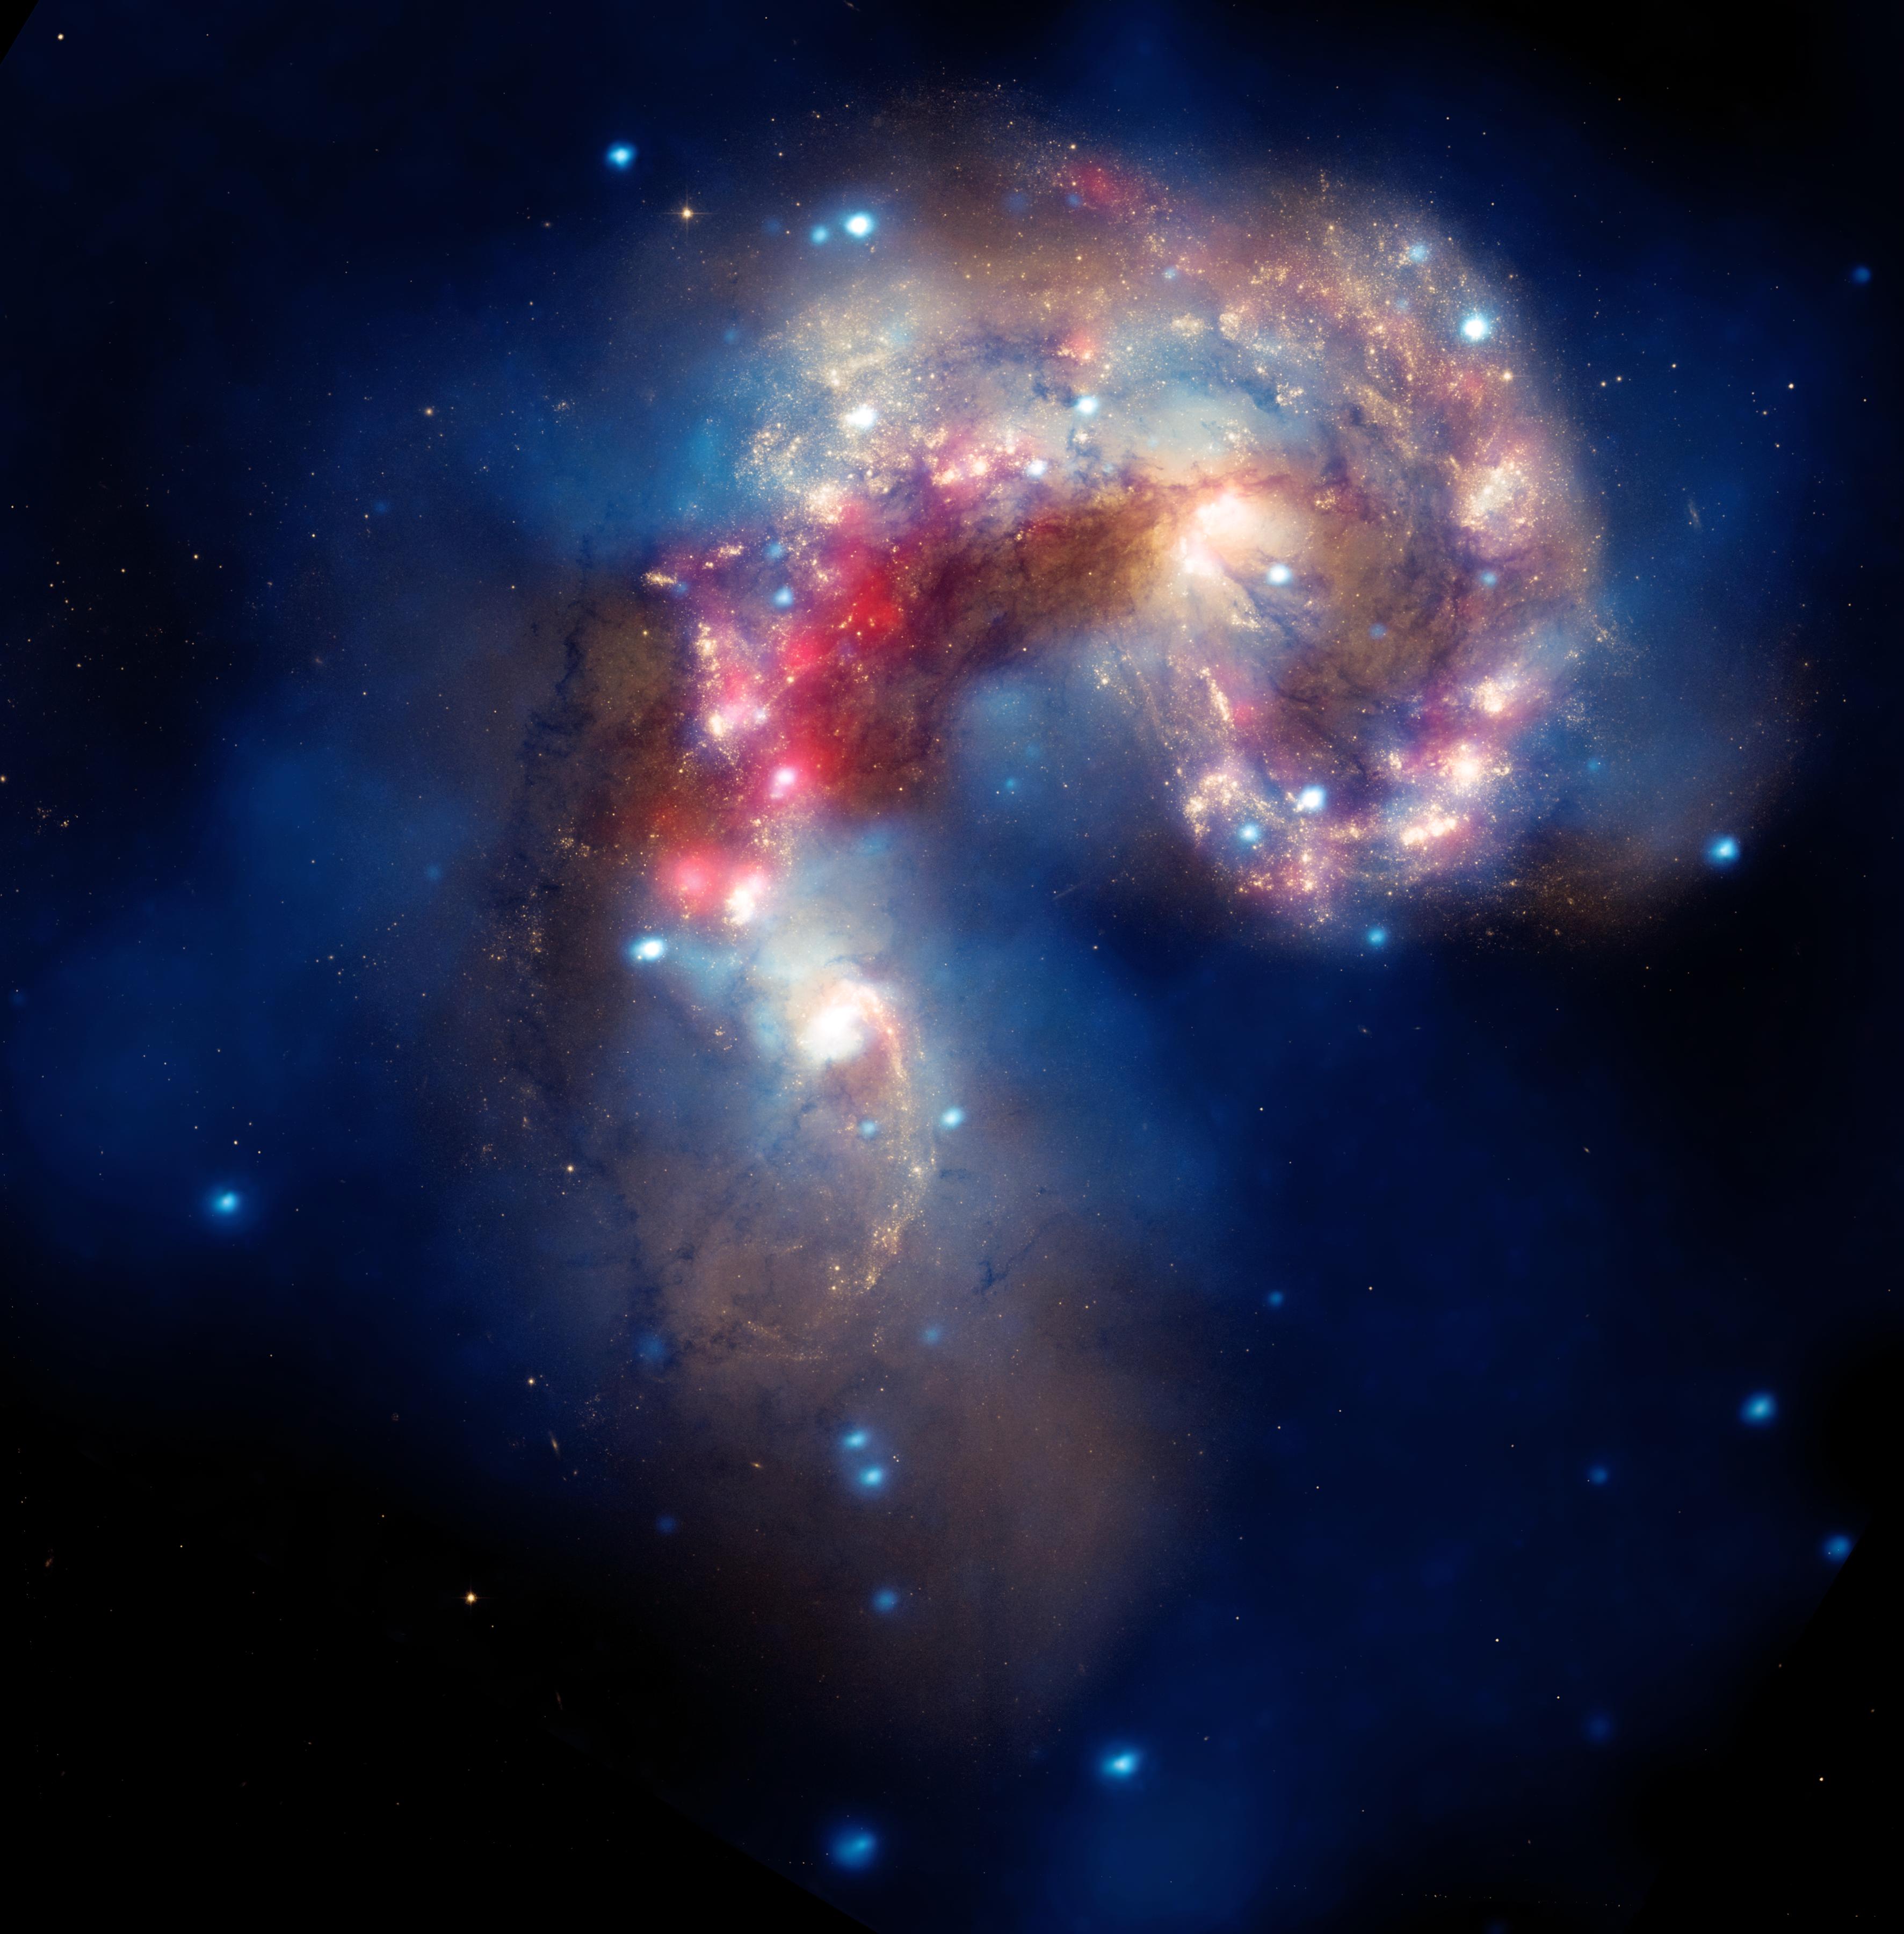 The Antennae galaxies, located about 62 million light-years from Earth, are shown in this composite image. The X-ray image from Chandra shows huge clouds of hot, interstellar gas, which have been injected with rich deposits of elements from supernova explosions.